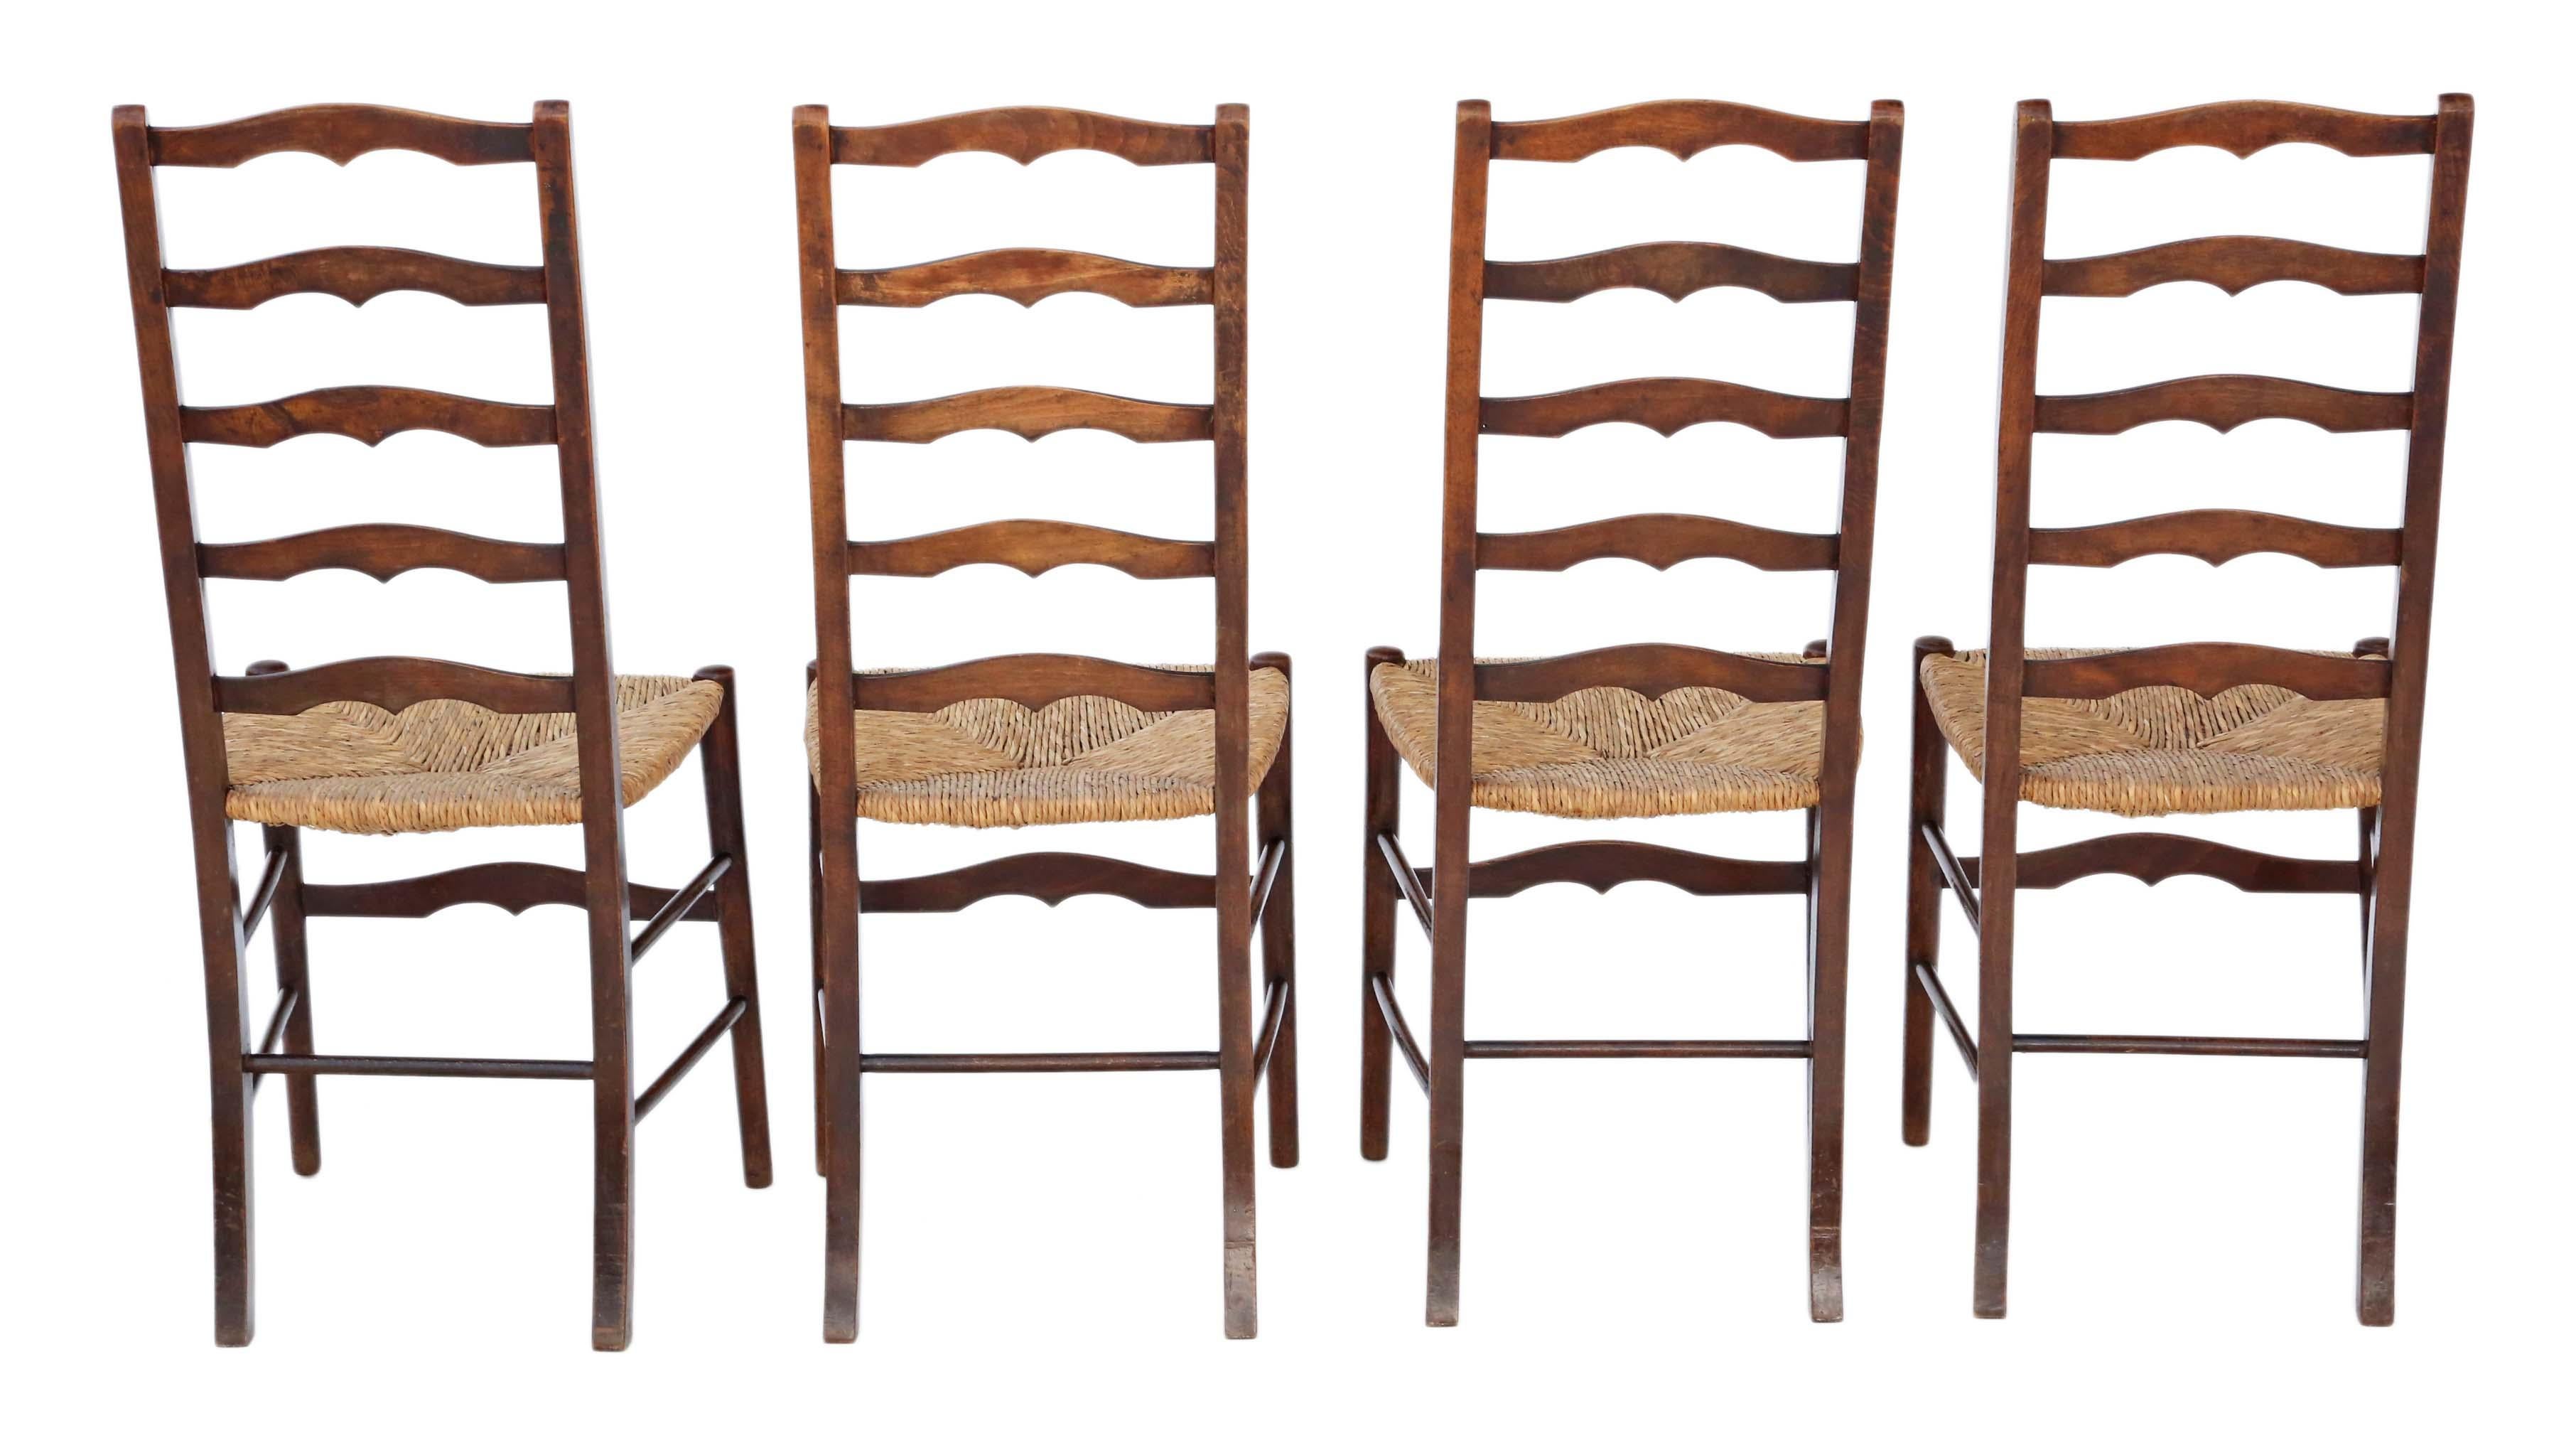 Antique set of 4 circa 1910-1920 beech and rush kitchen dining chairs.
Lightweight chairs that have no loose joints. Very decorative. No woodworm.
Would look great in the right location!
Overall maximum dimensions: 42cm W x 43cm D x 100cm H (46cm